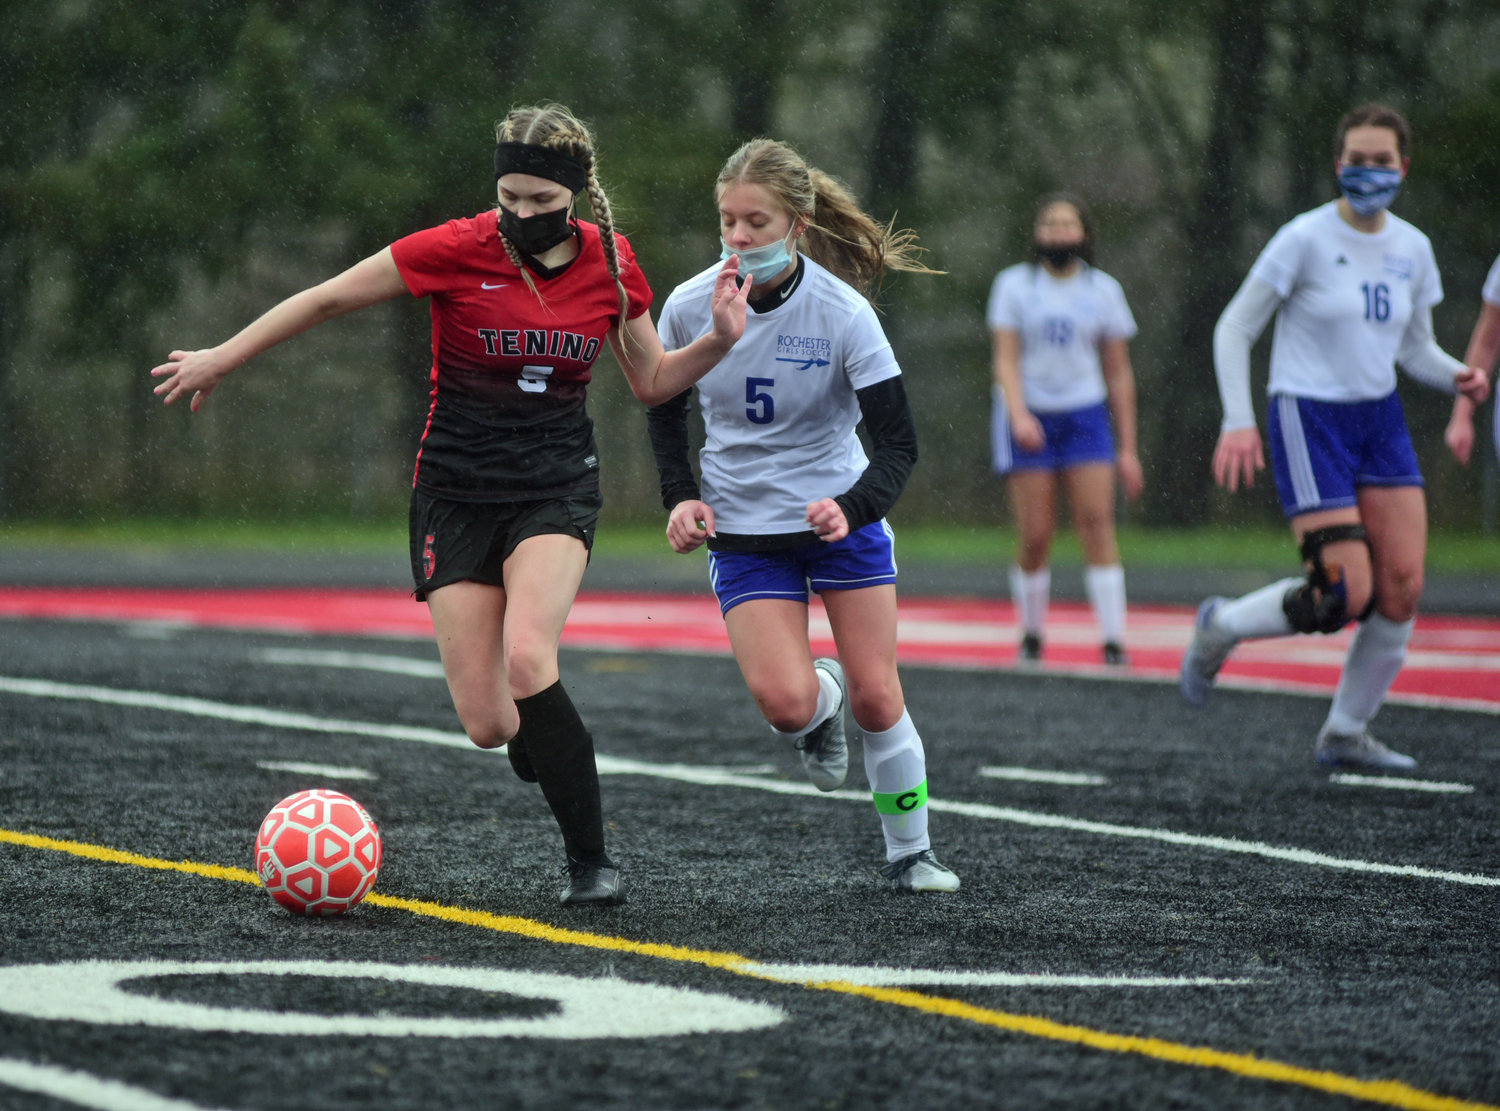 Tenino's Morgan Miner (5) and Rochester's Megan Haury (5) battle for a ball on Saturday.